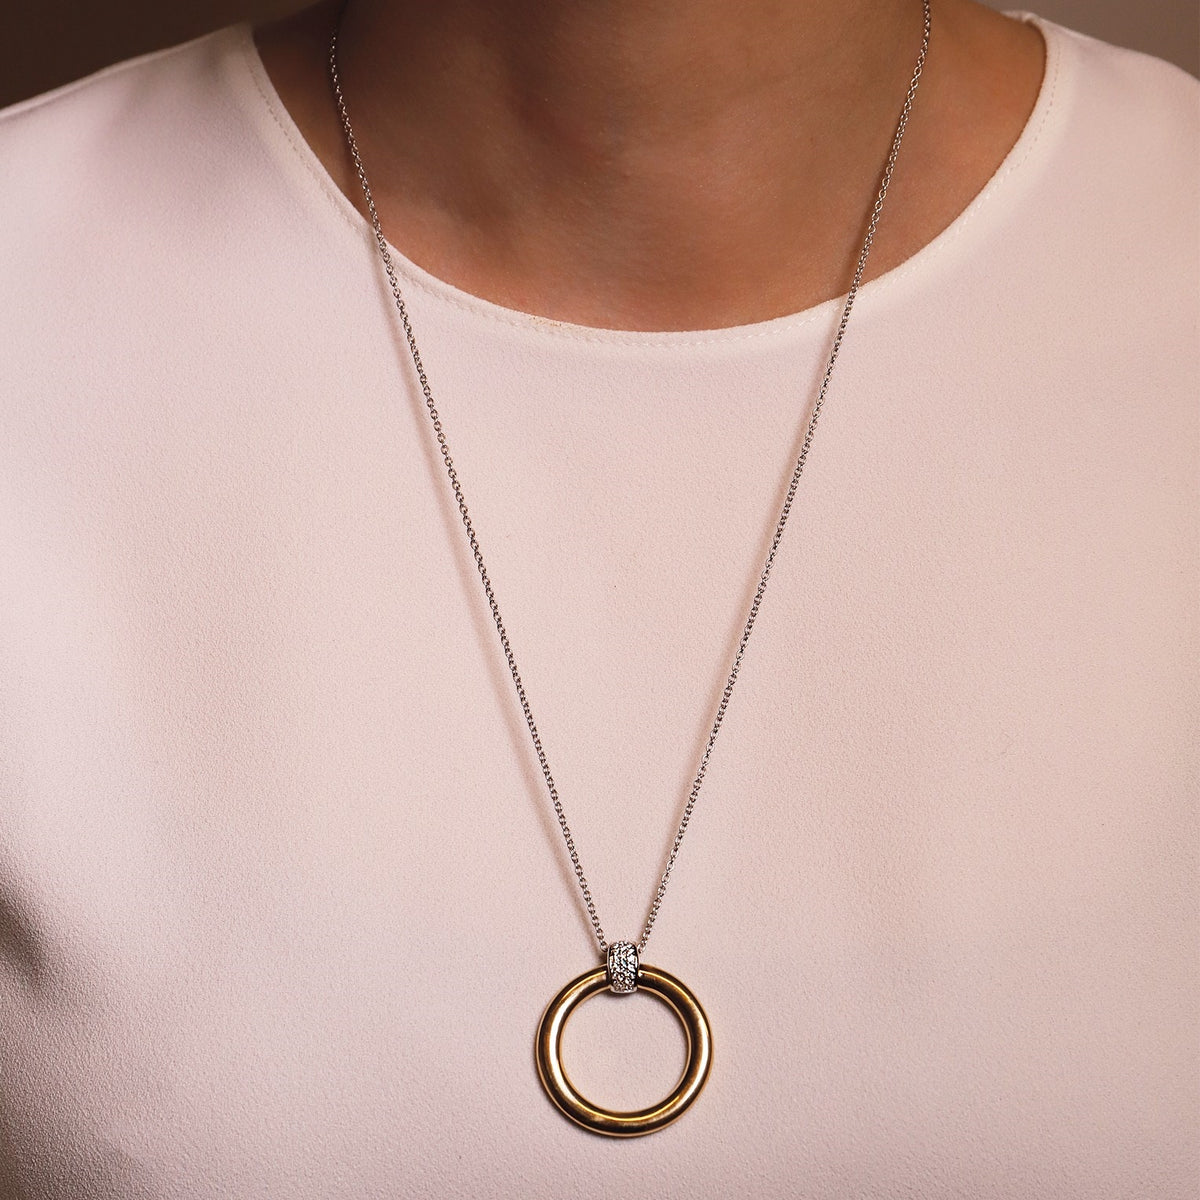 TI SENTO Sterling Silver and Gold Tone Circle Necklace on Model